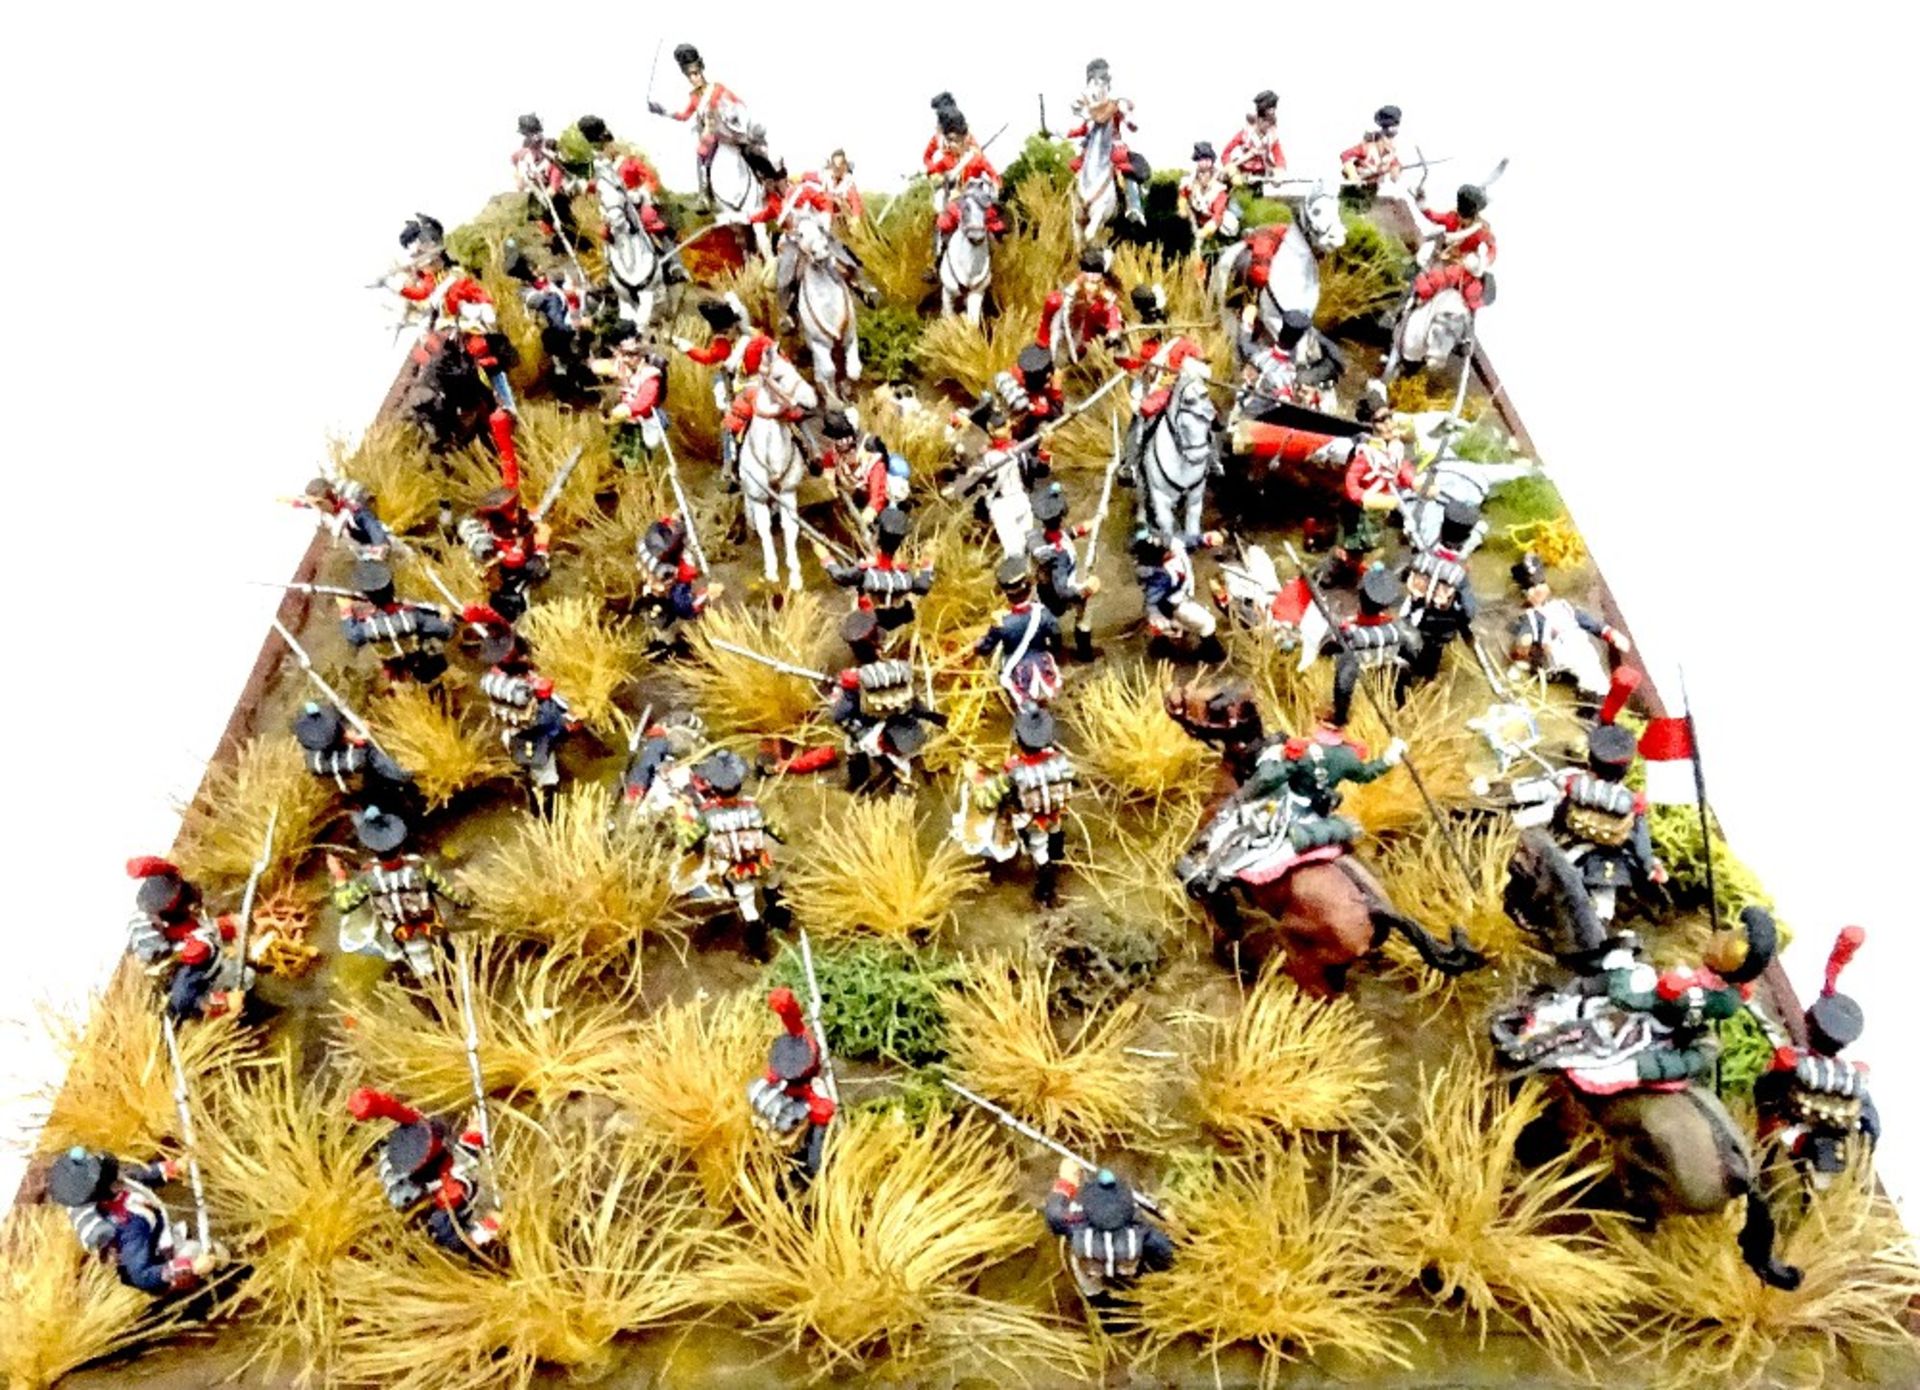 Charge of the Union Brigade and Gordon Highlanders at Waterloo 1815 - Image 2 of 4